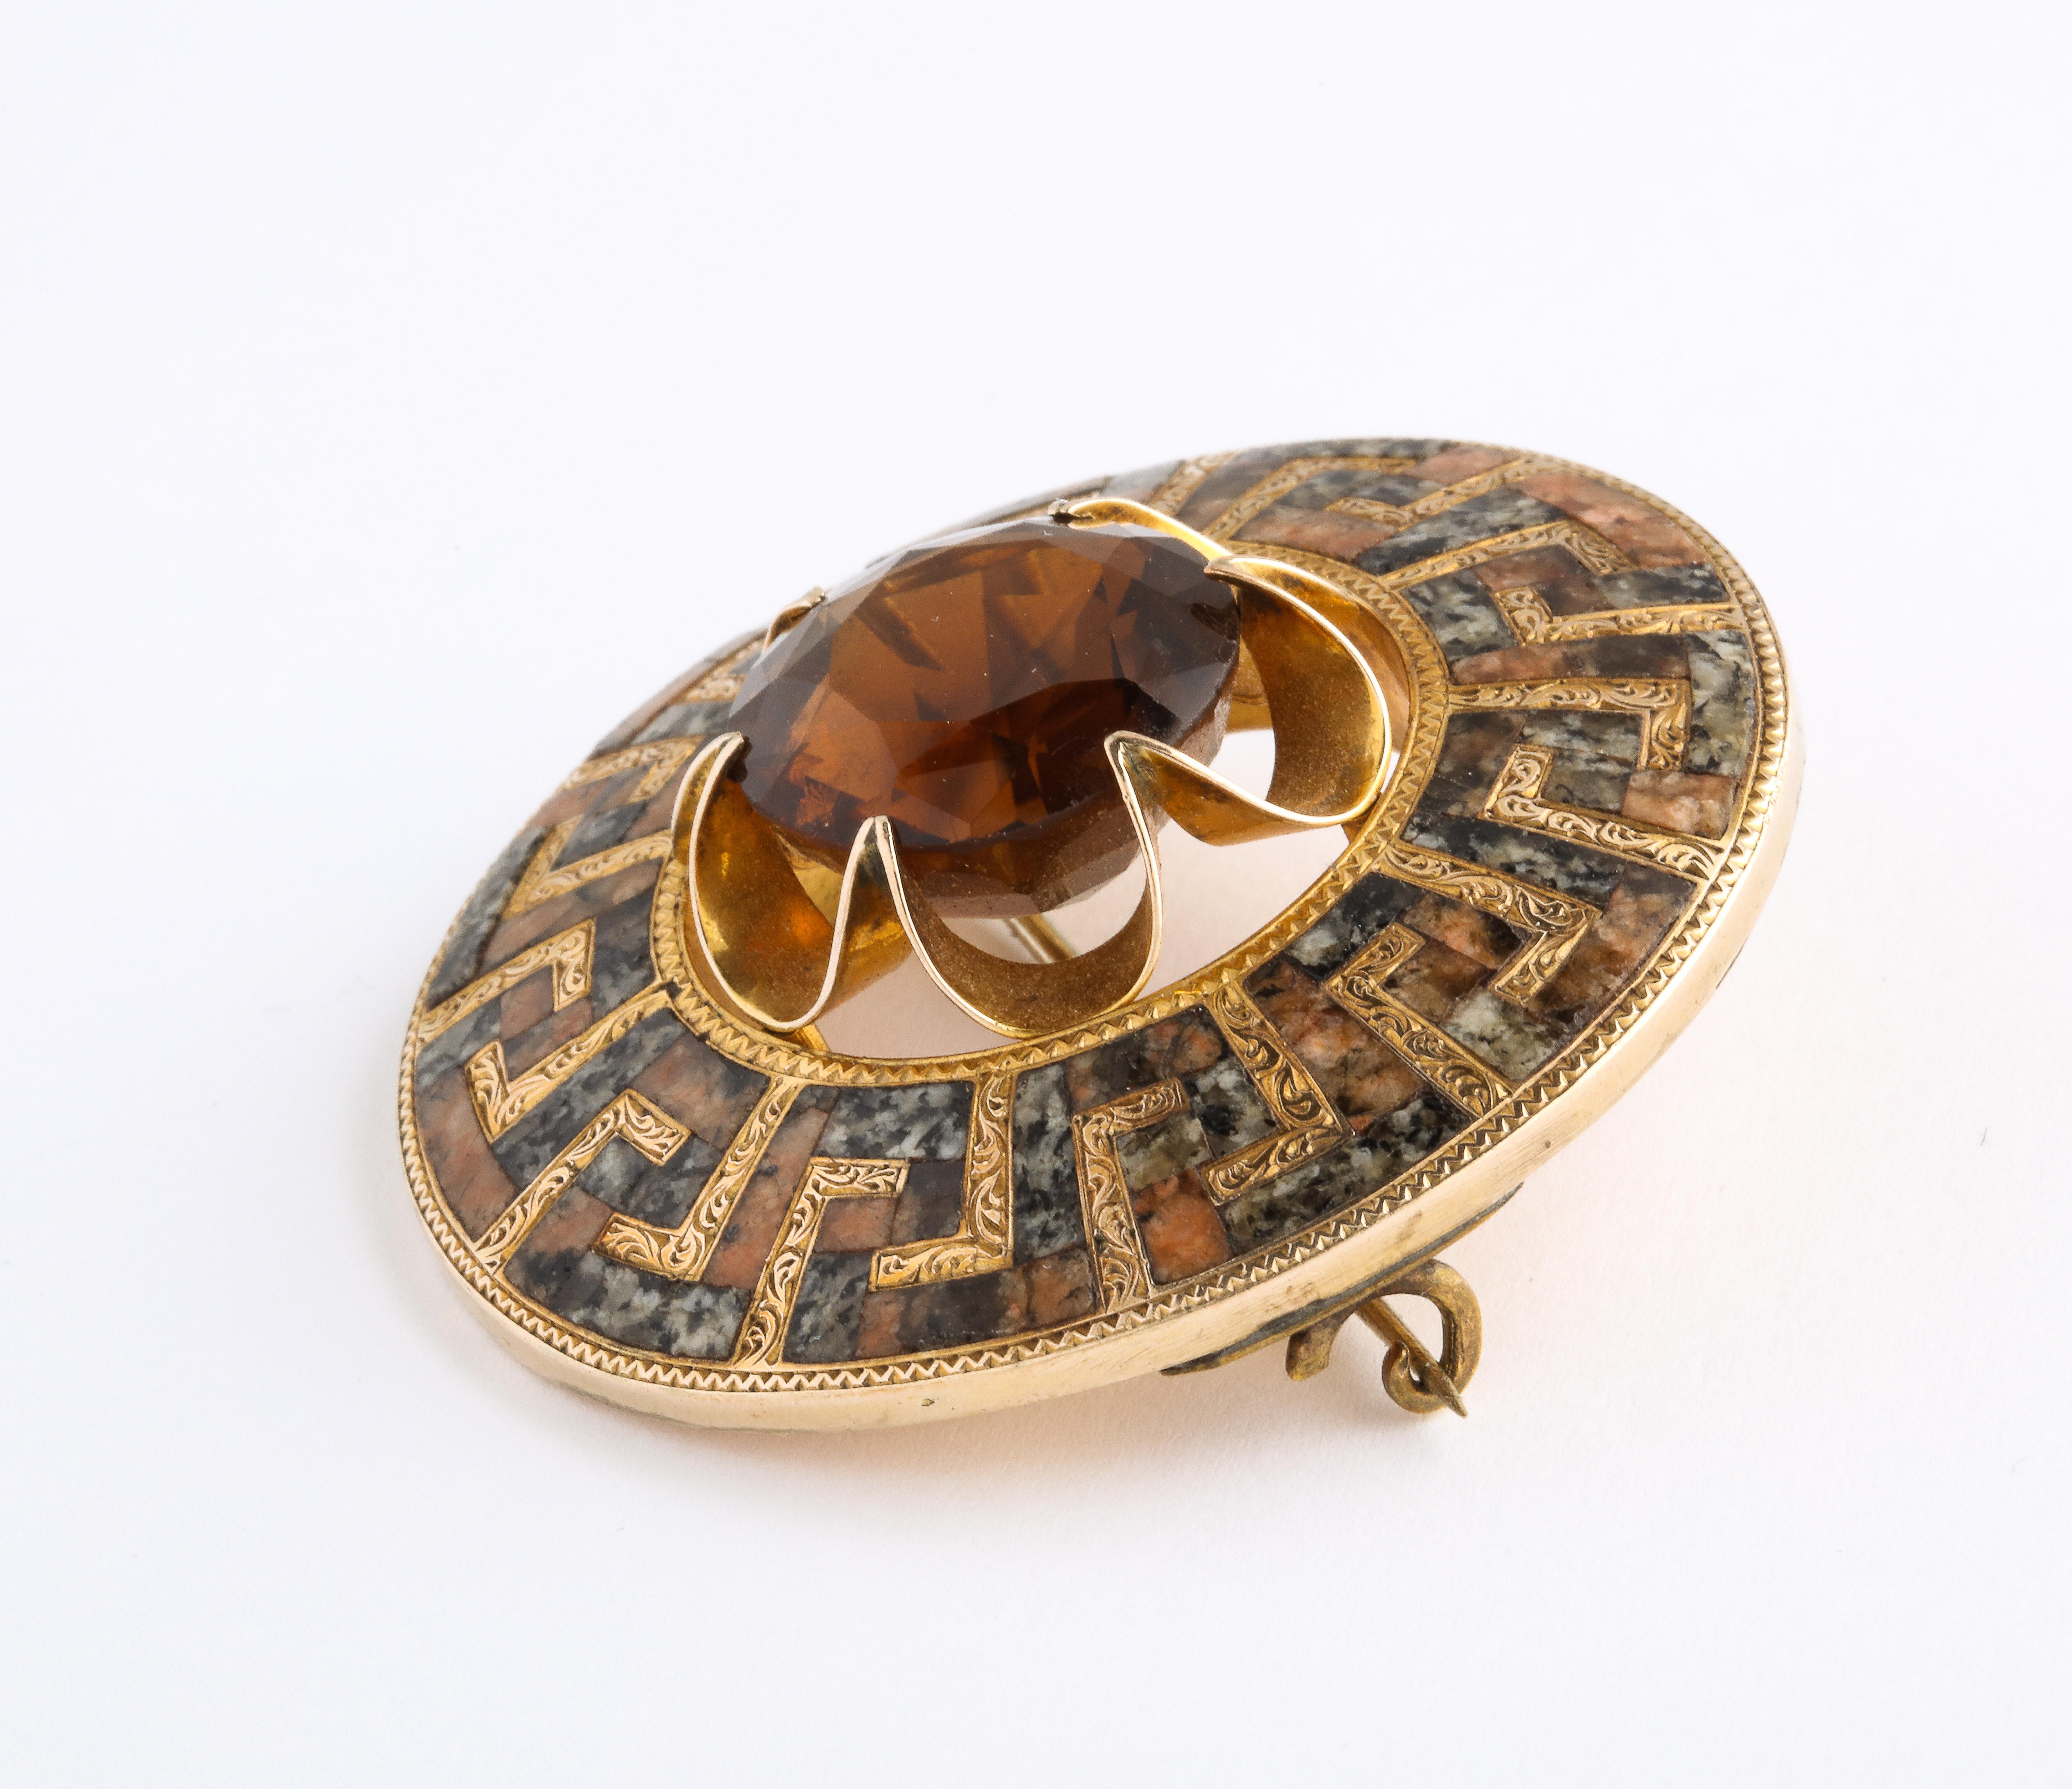 Dazzling gold and agate Scottish brooch made with an undulating Greek Key pattern in gold and granite with a flower burst large citrine pulling you in to the center. One of the most beautiful Scottish brooches I have found was artist made between